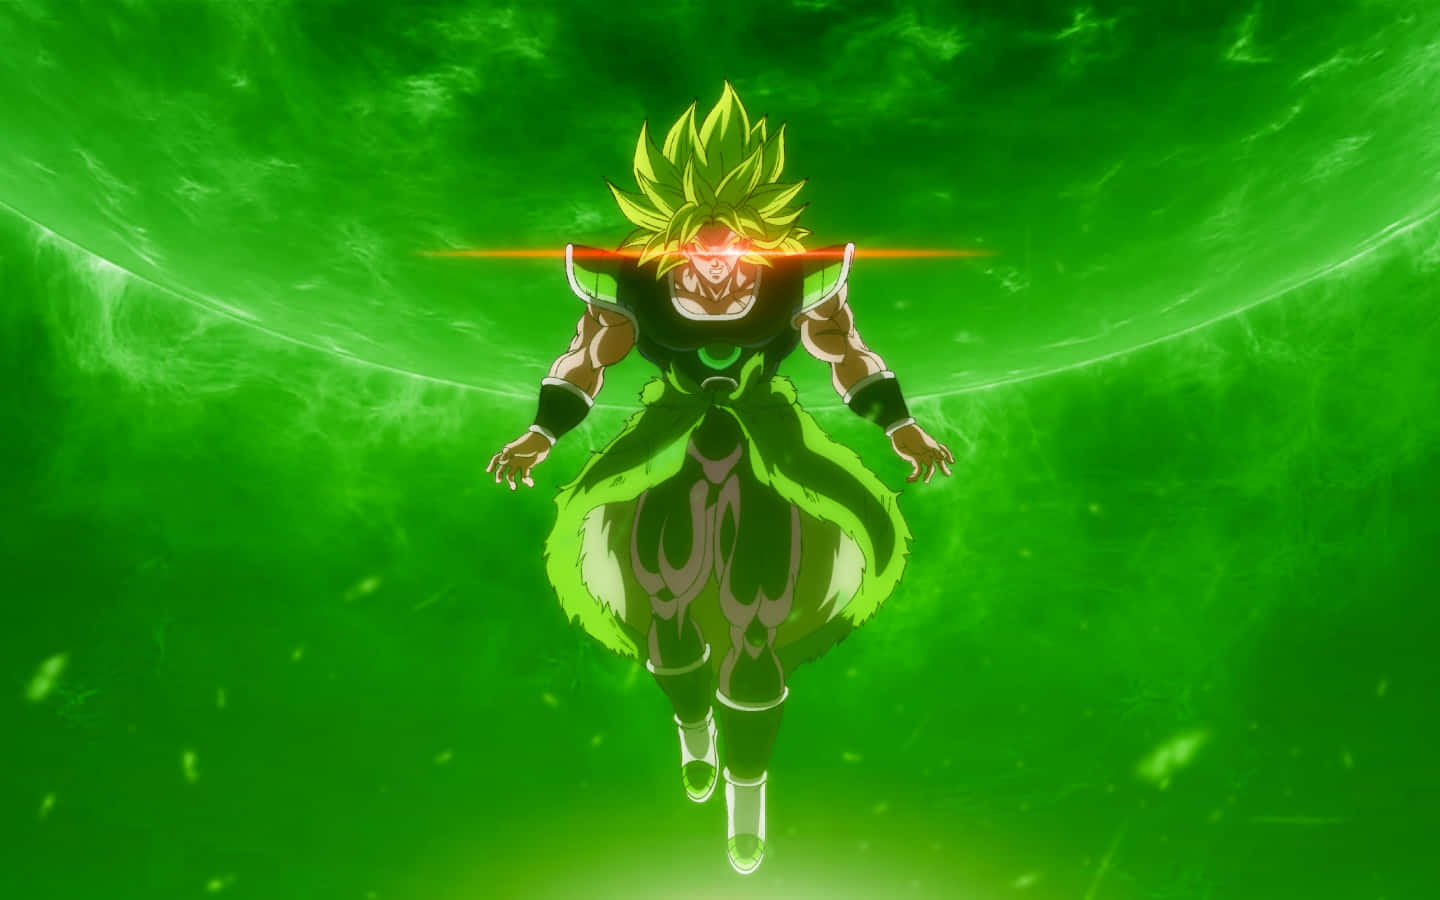 The full power of Broly in the new movie “Dragon Ball Super Broly”